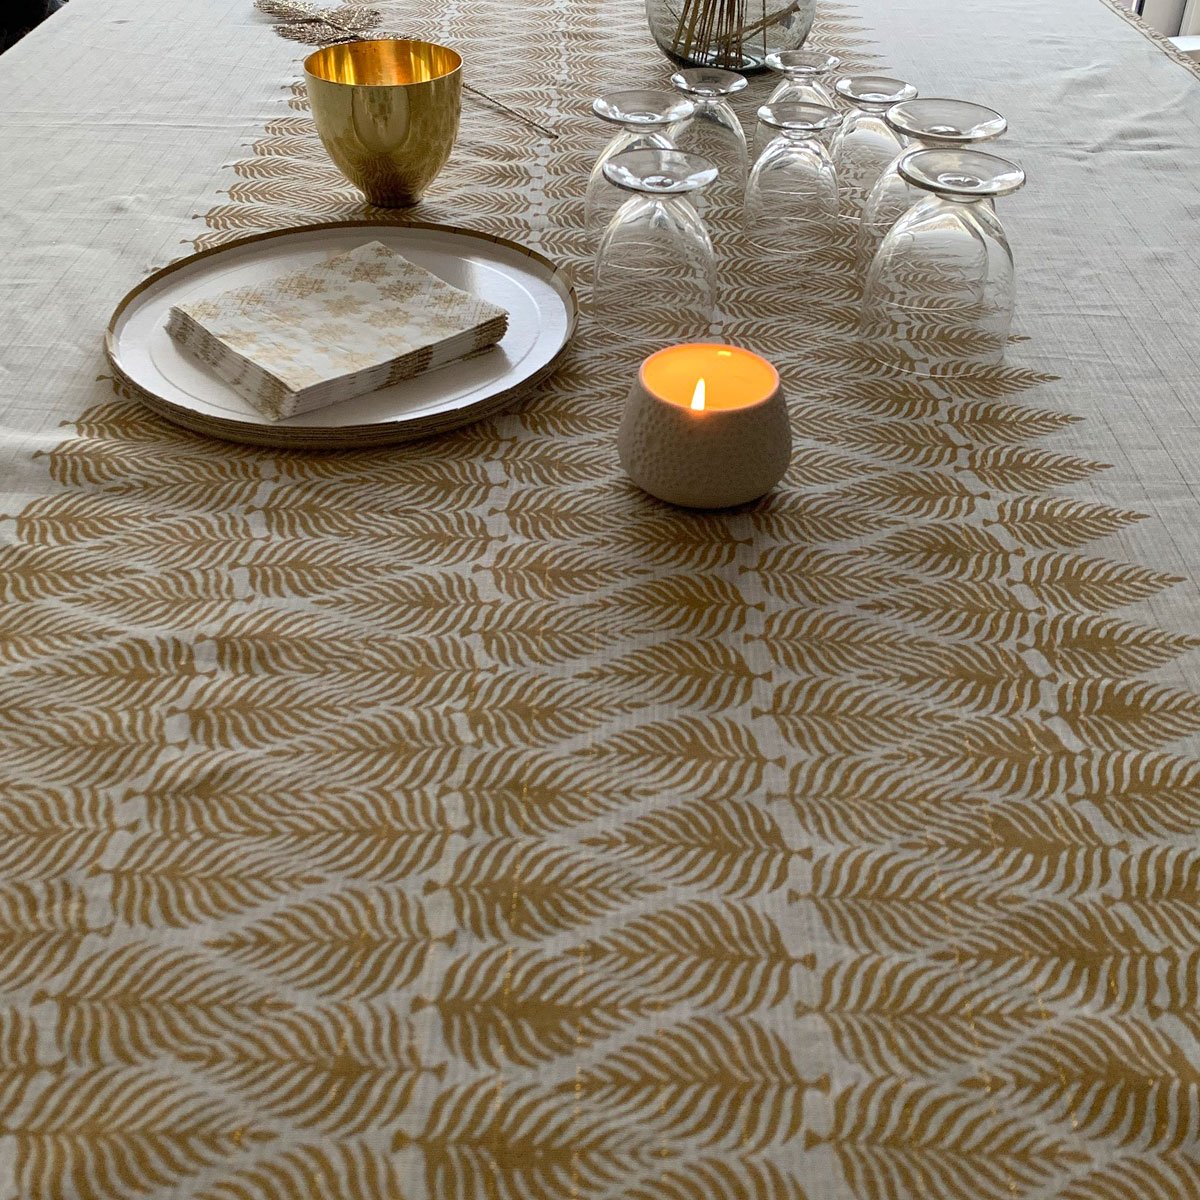 Itlalian linen hand stamped Tablecloth The Gold Line